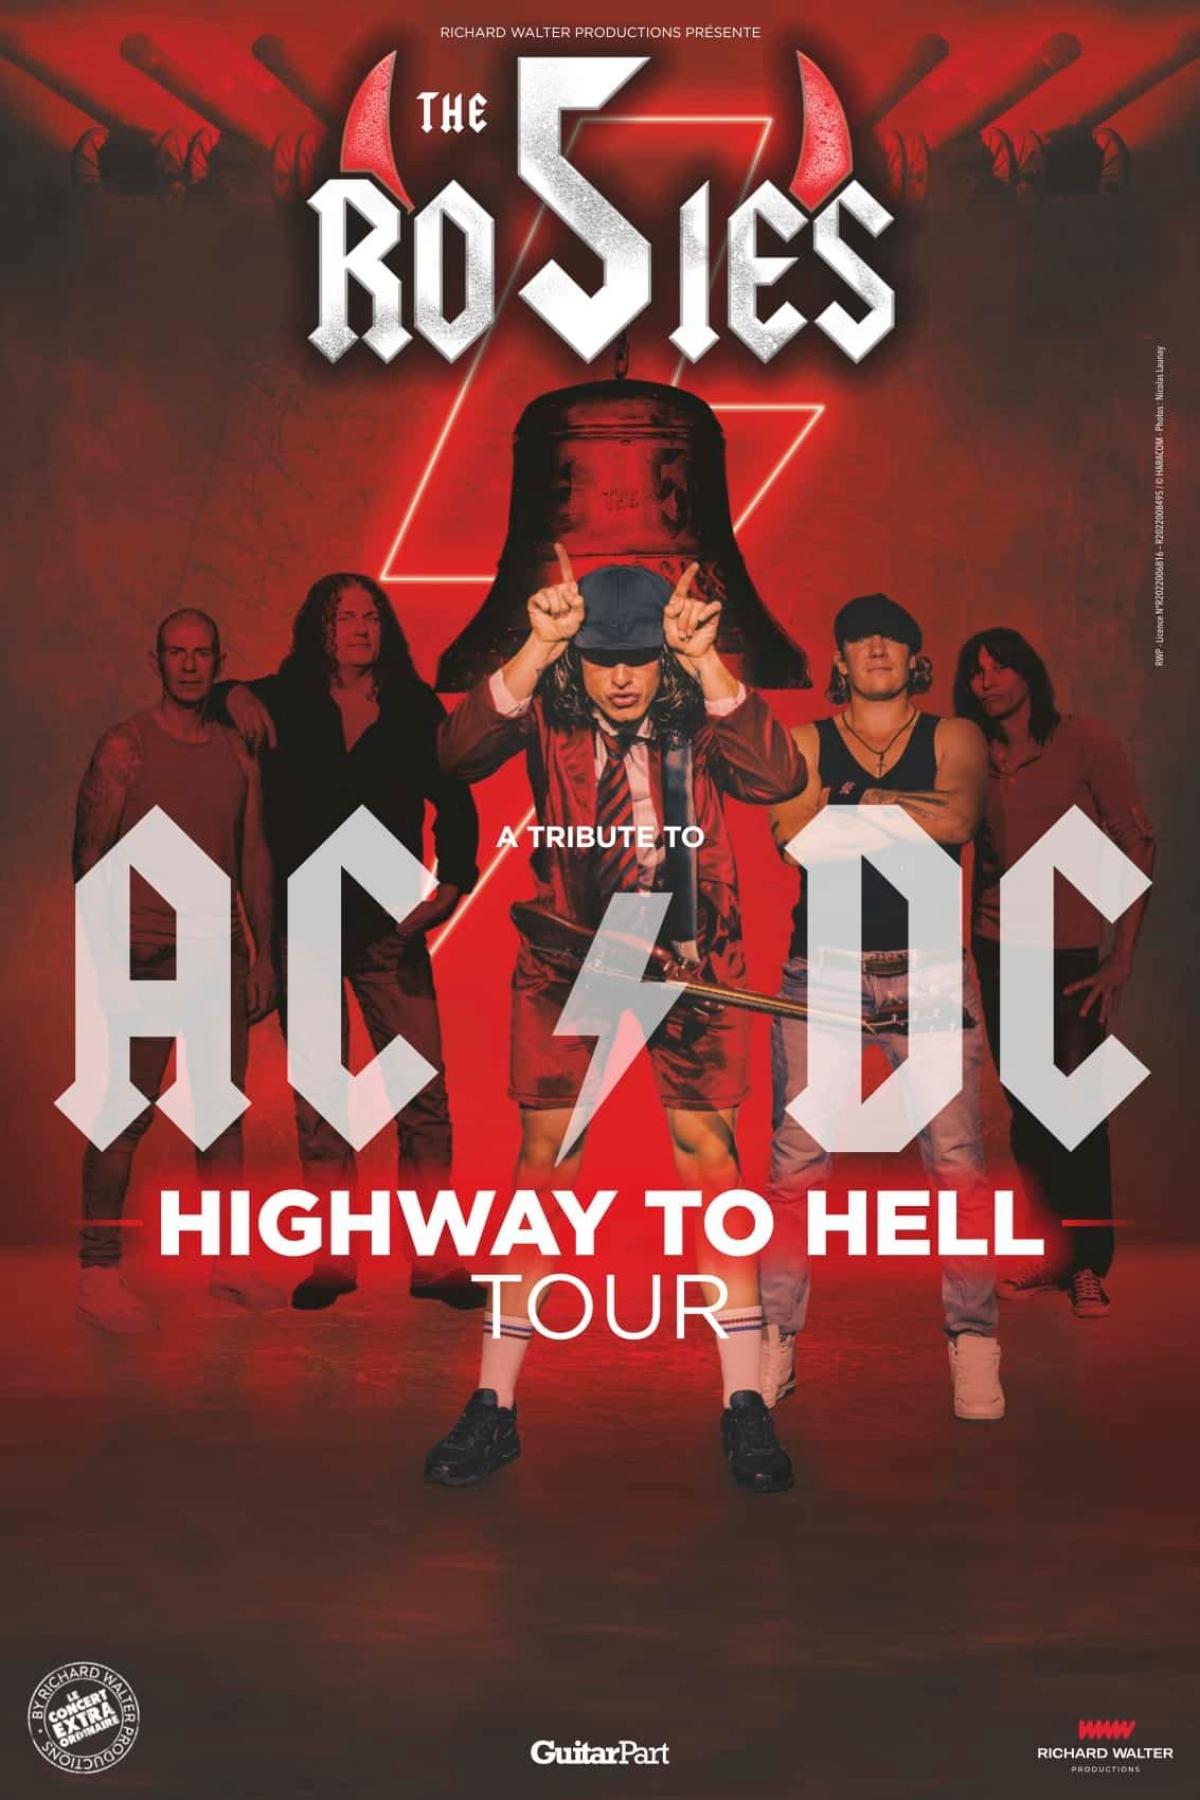 The 5 Rosies - Highway To Hell Tour in der Rockstore Tickets